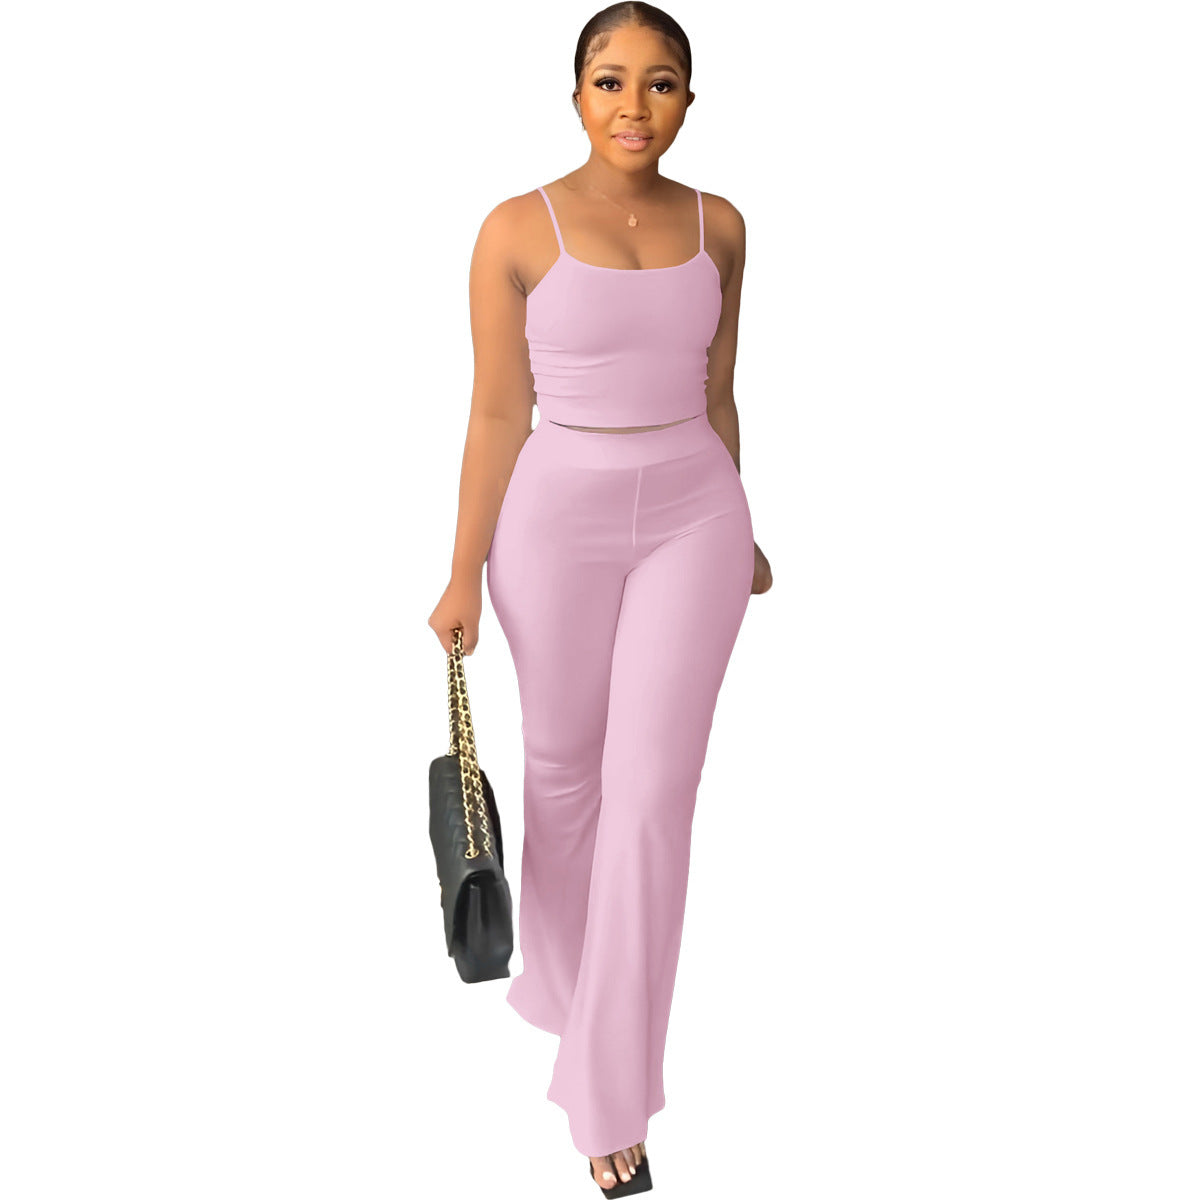 Women's Solid Color Sling Bell-bottom Pants Simple Fashion Suit